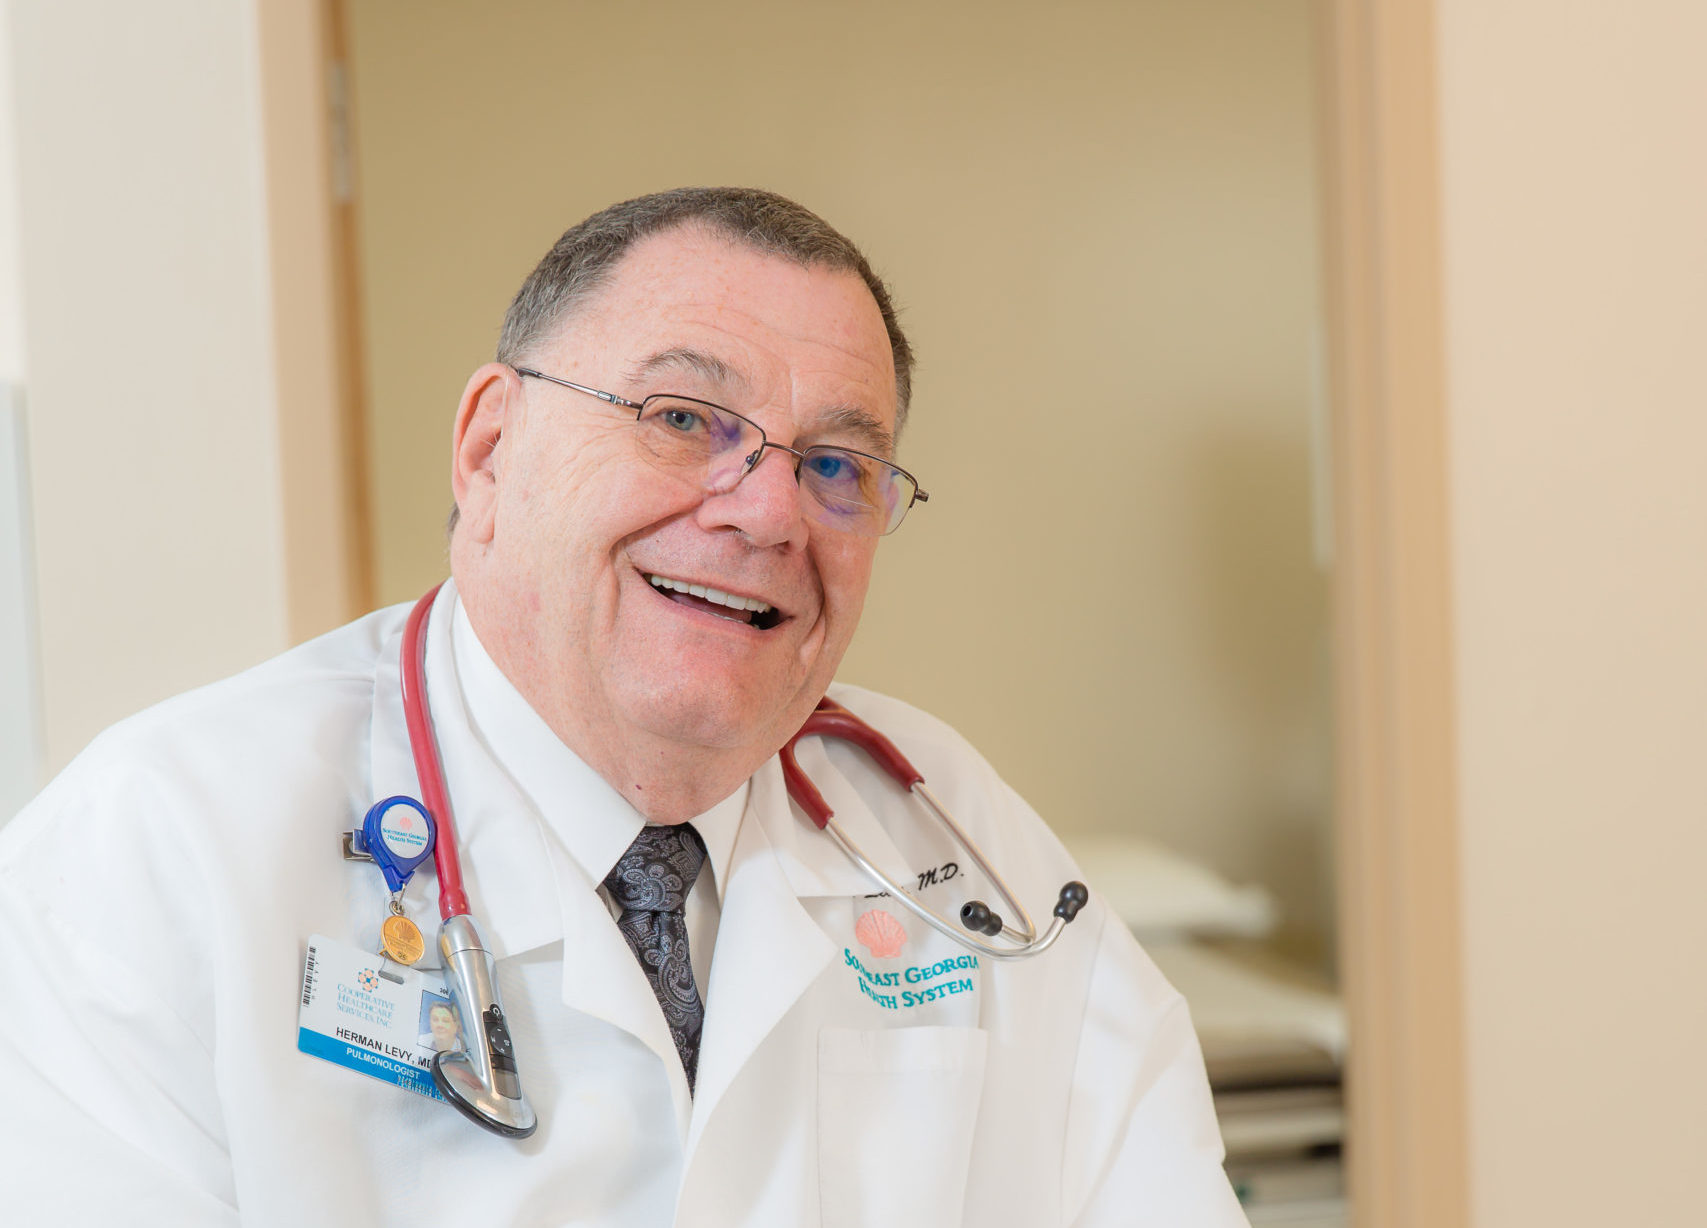 BEHIND THE MASK: Herman Levy, M.D.